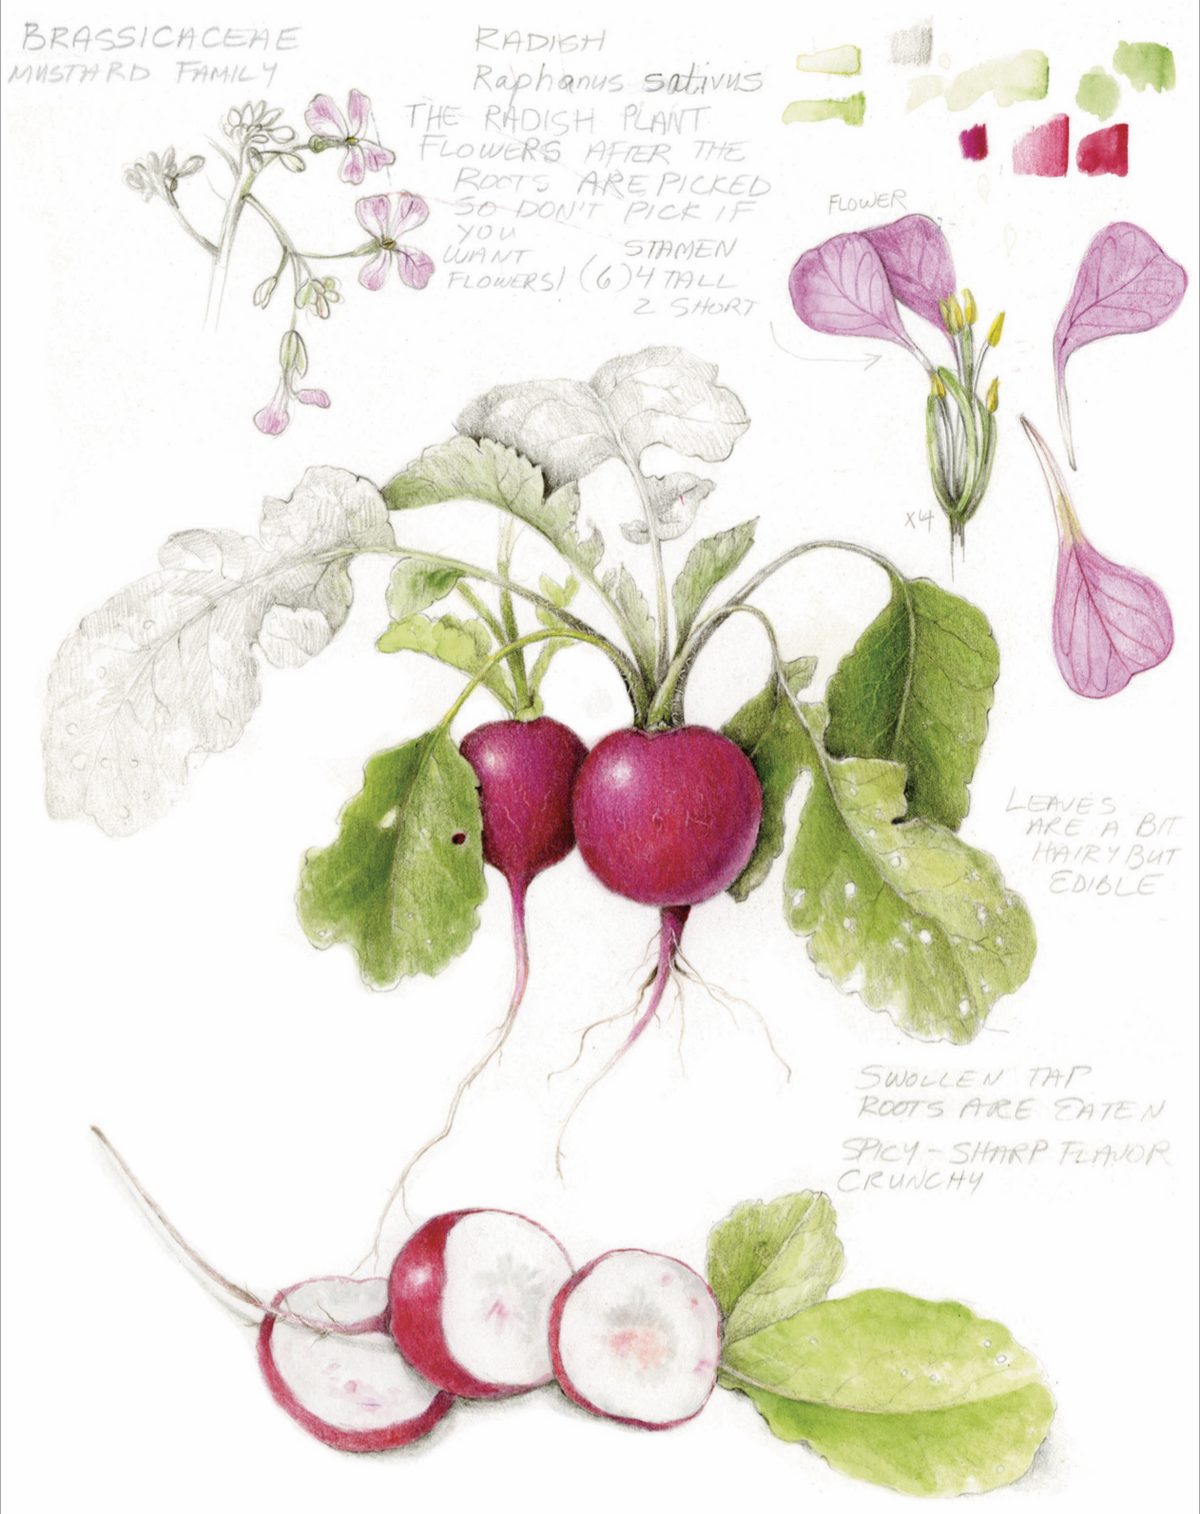 The Joy of Botanical Drawing by Wendy Hollender